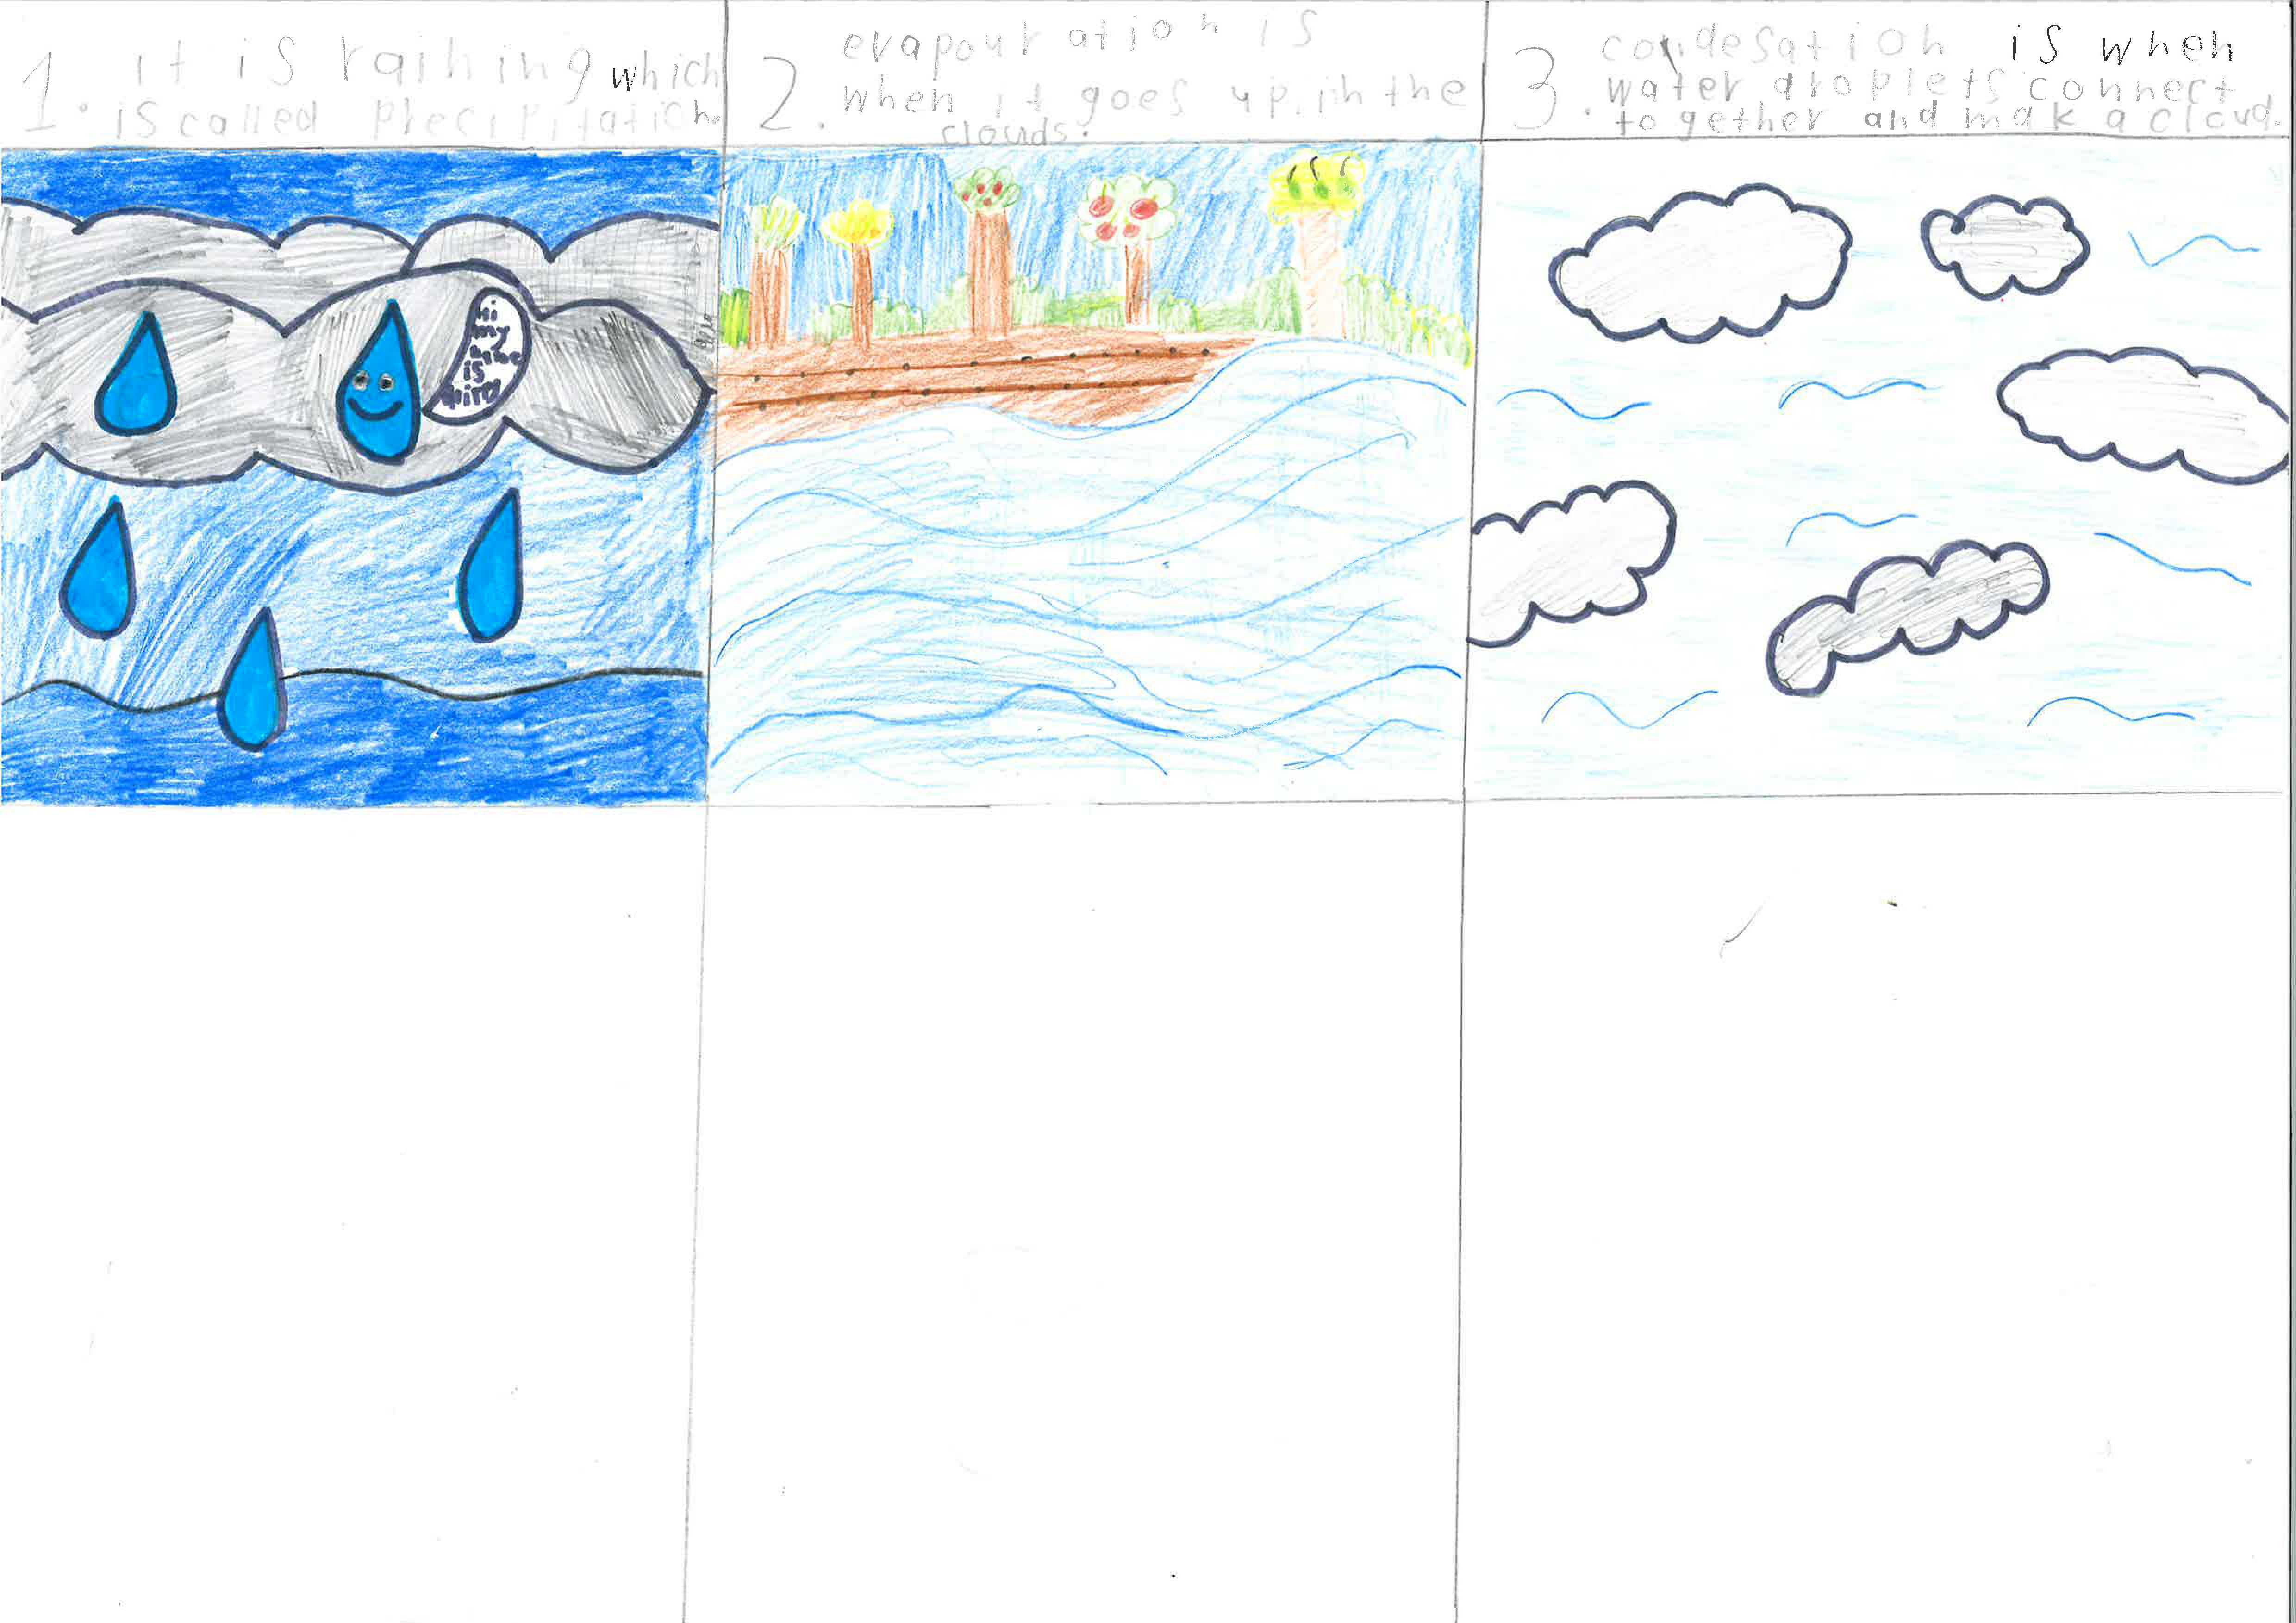 Jack - the water cycle